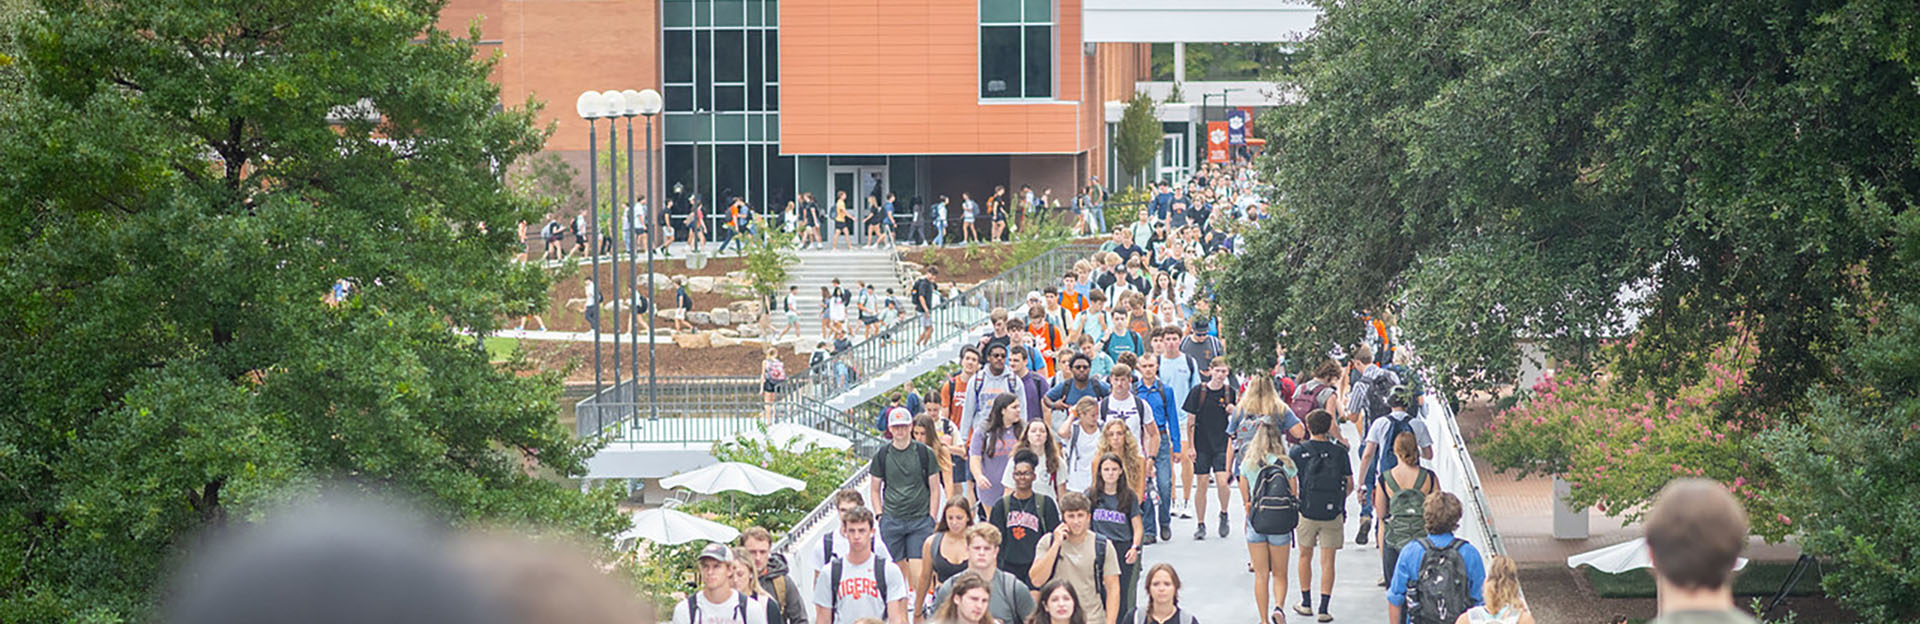 Students walking on the bridge in front of the library